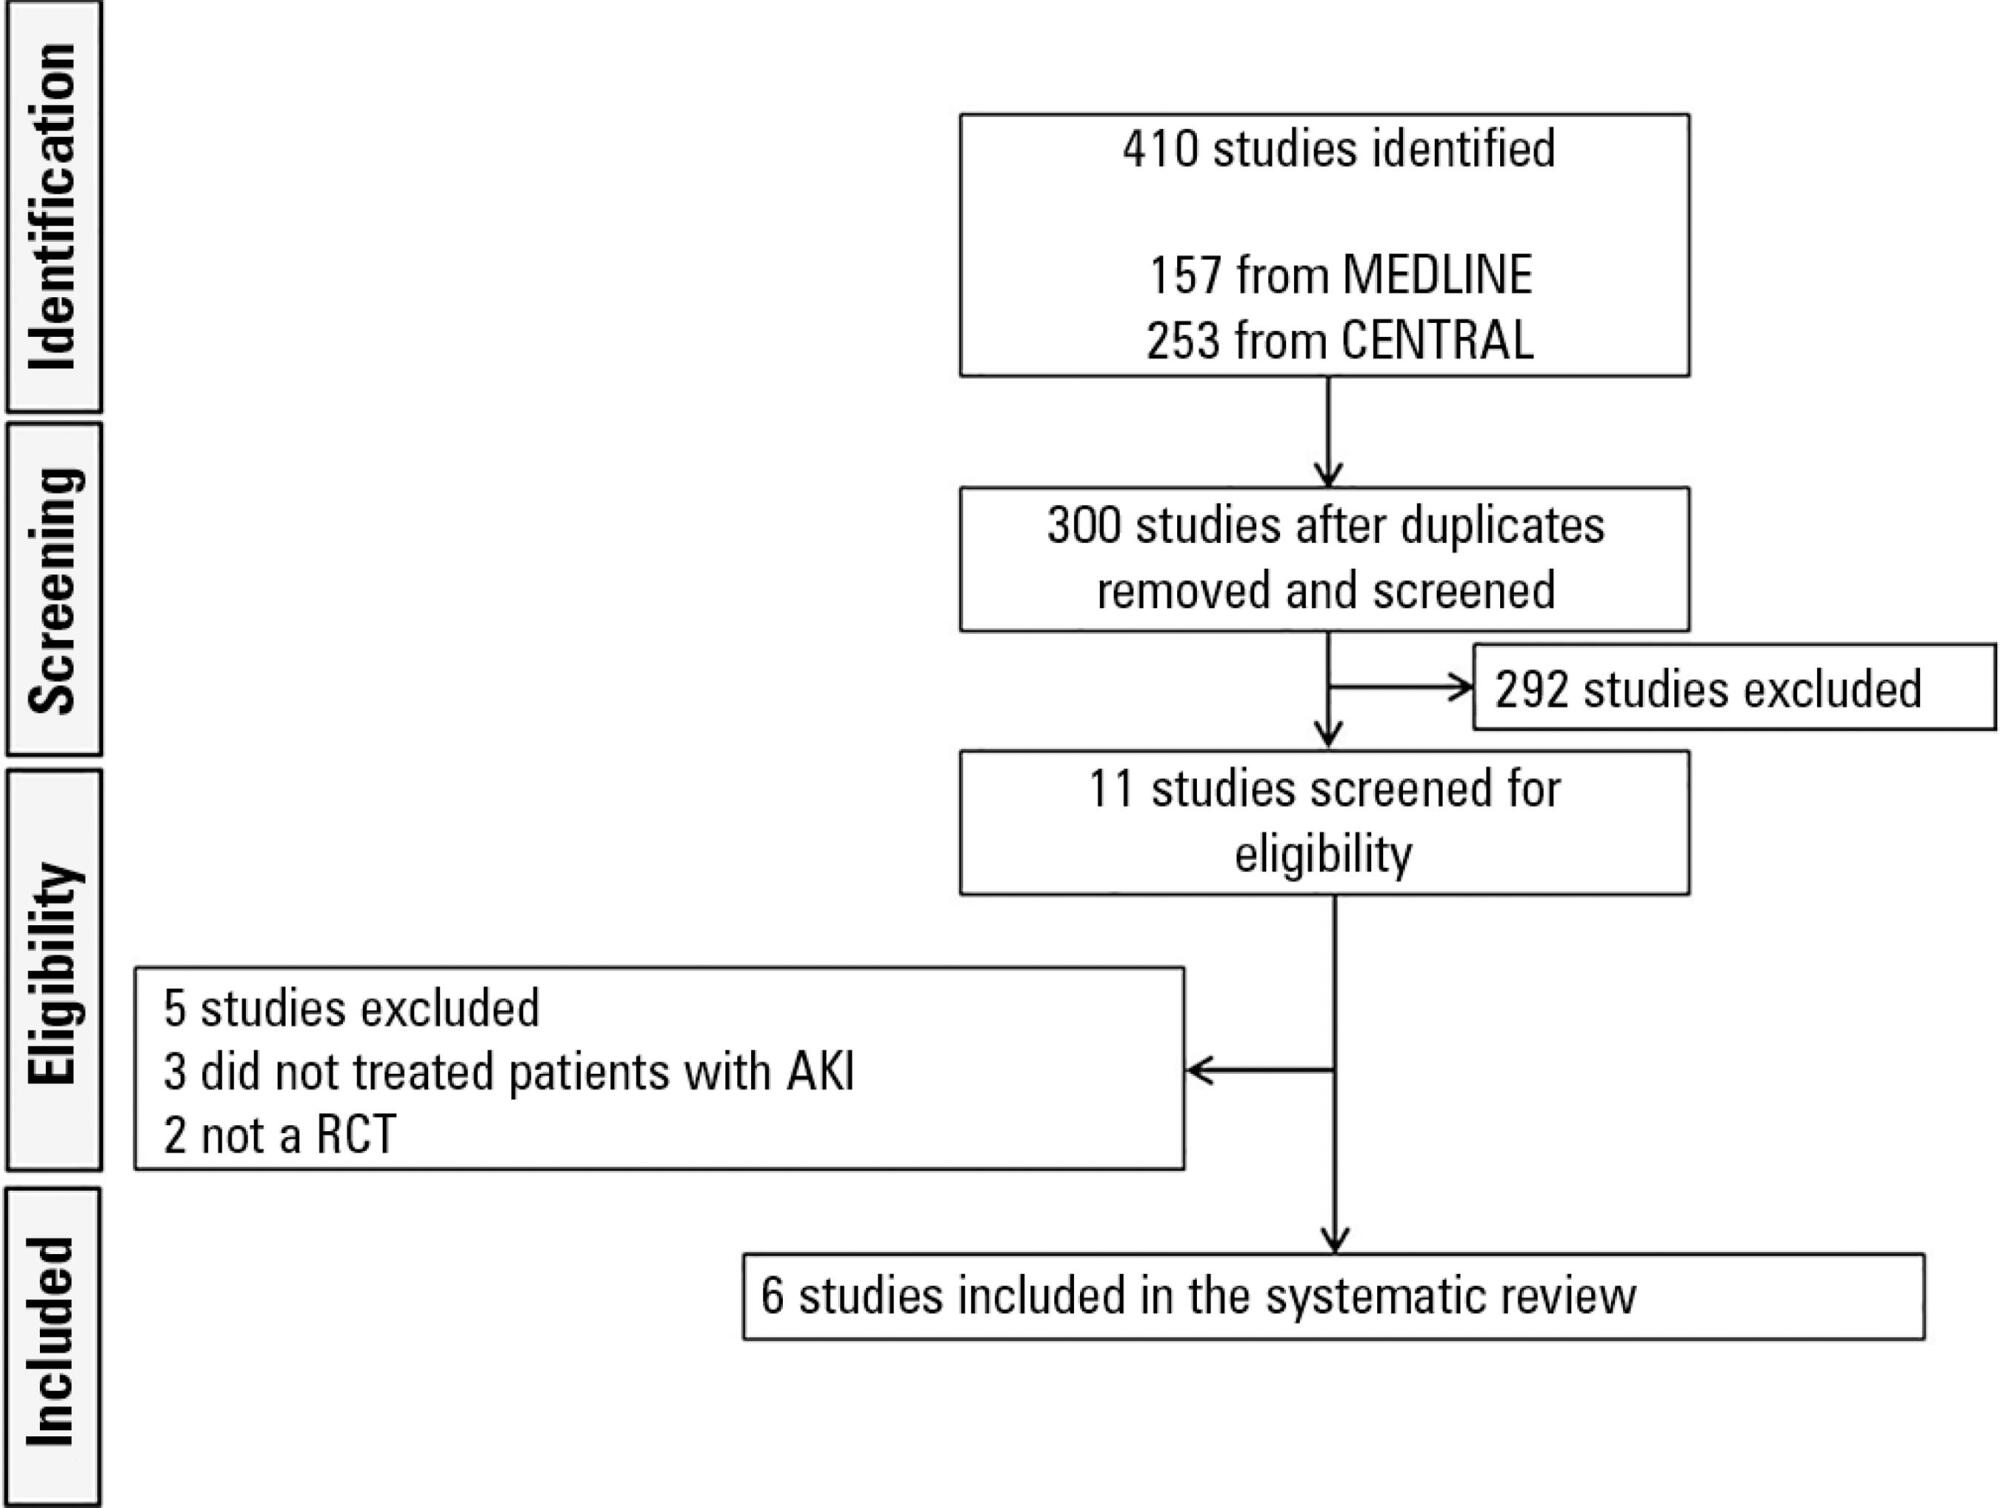 Early versus delayed initiation of renal replacement therapy for acute kidney injury: an updated systematic review, meta-analysis, meta-regression and trial sequential analysis of randomized controlled trials